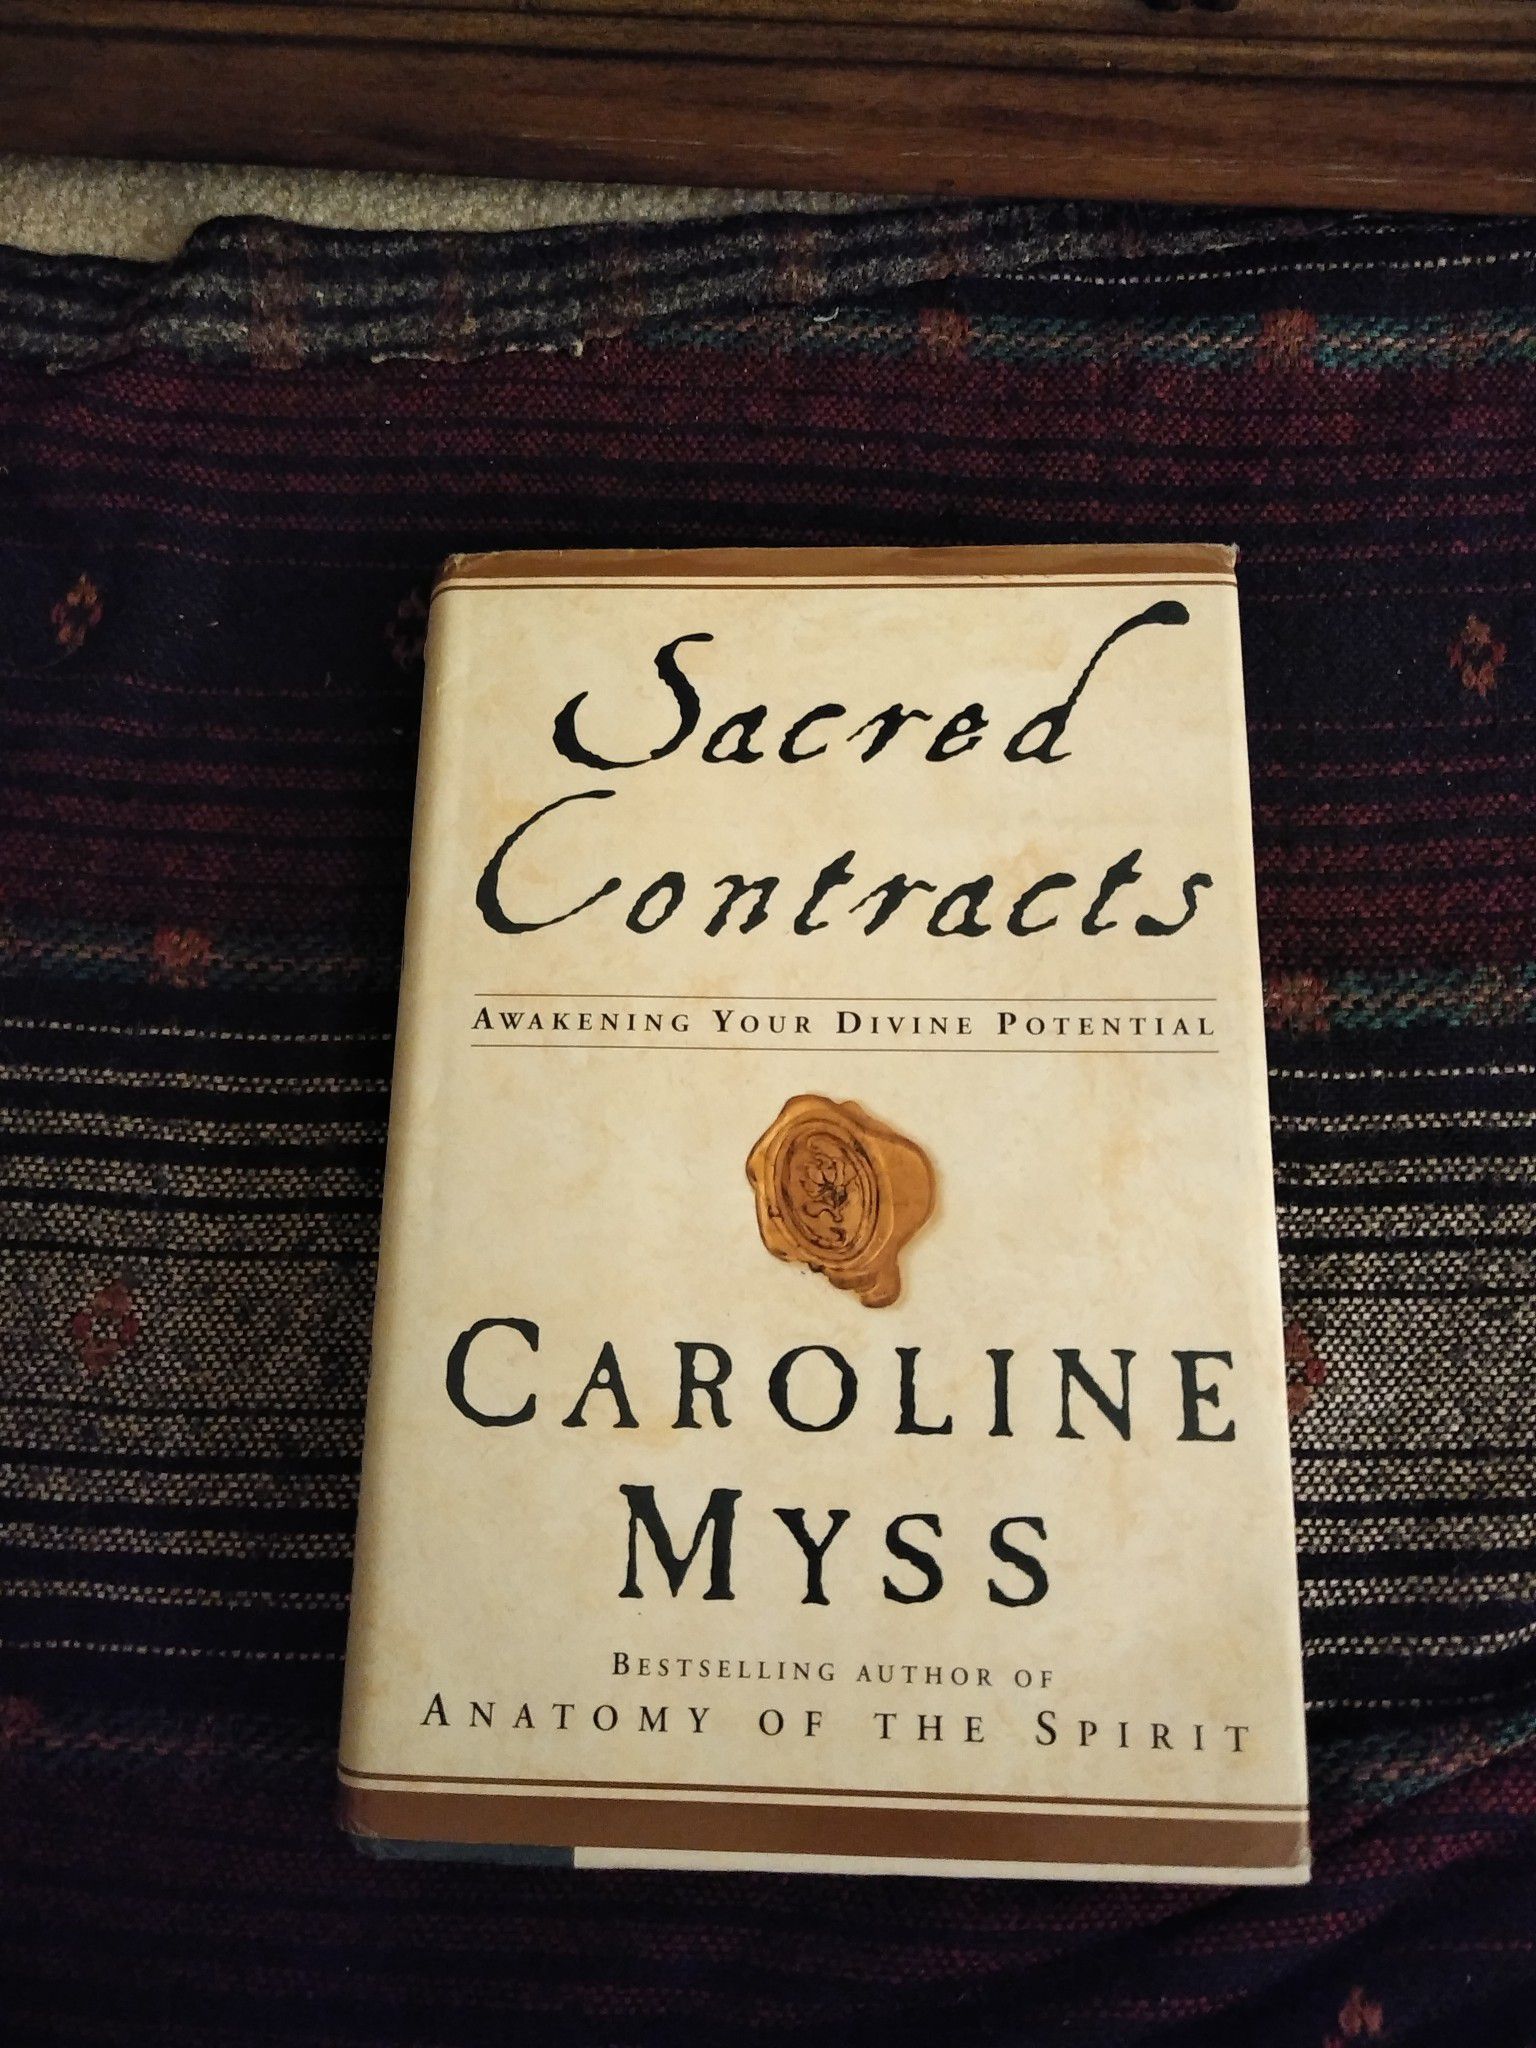 Sacred contracts by Caroline Myss